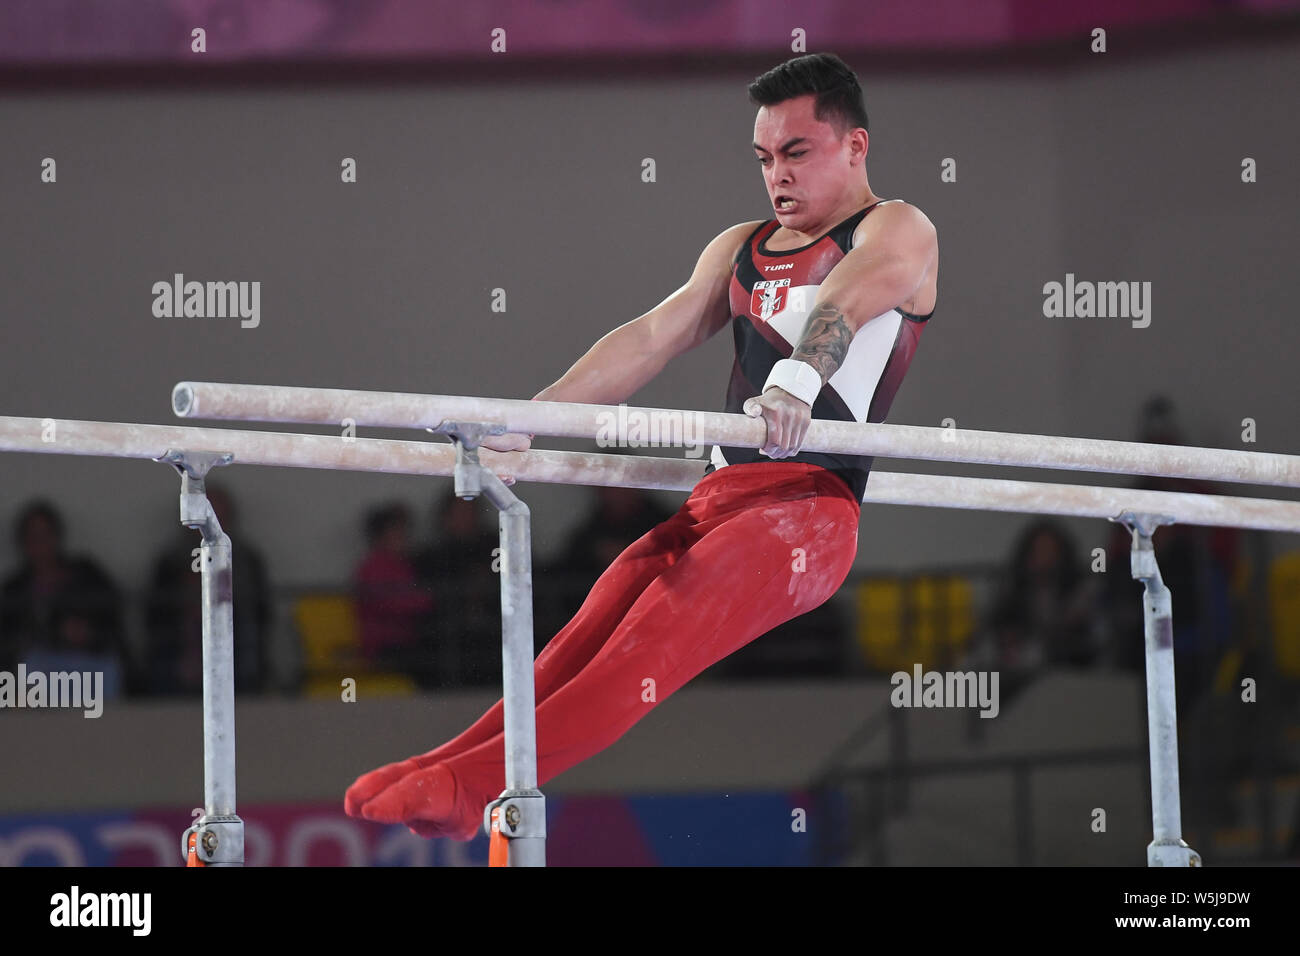 July 28, 2019, Lima, Peru: LUIS PIZARRO from Peru competes on the still rings during the team finals competition held in the Polideportivo Villa El Salvador in Lima, Peru. Credit: Amy Sanderson/ZUMA Wire/Alamy Live News Stock Photo